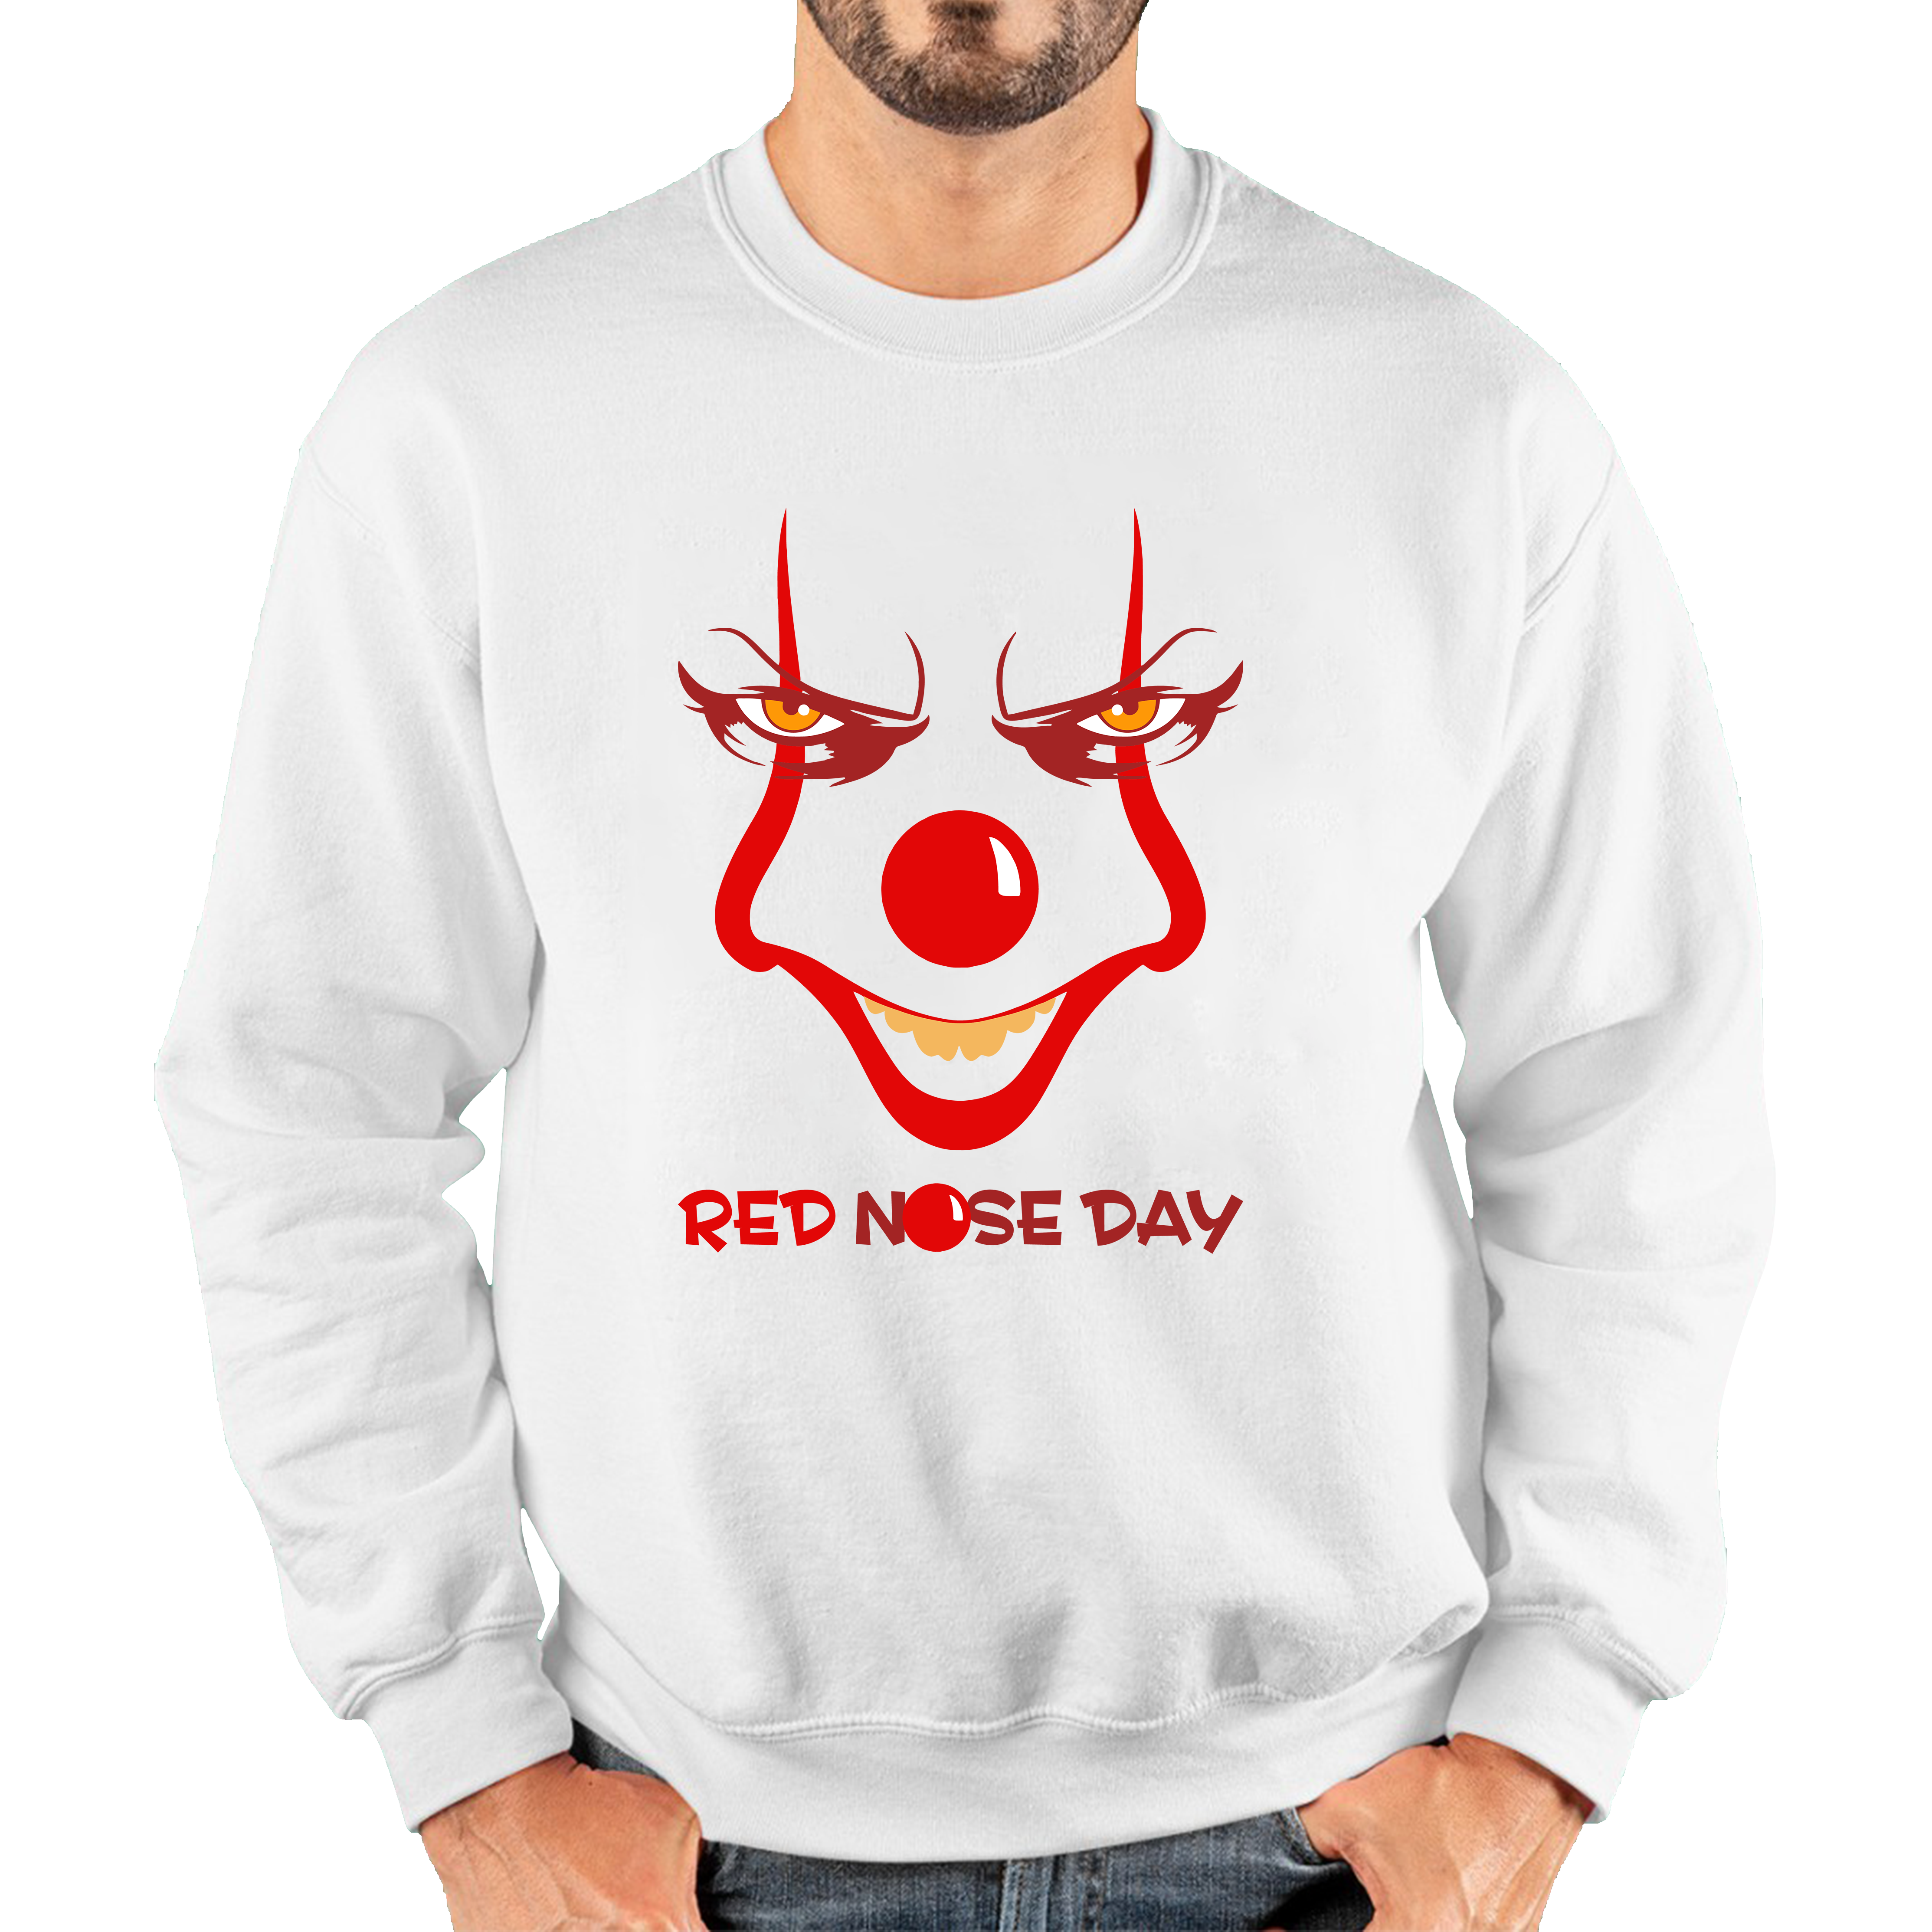 Pennywise Clown Face Red Nose Day Funny Comic Relief Adult Sweatshirt. 50% Goes To Charity